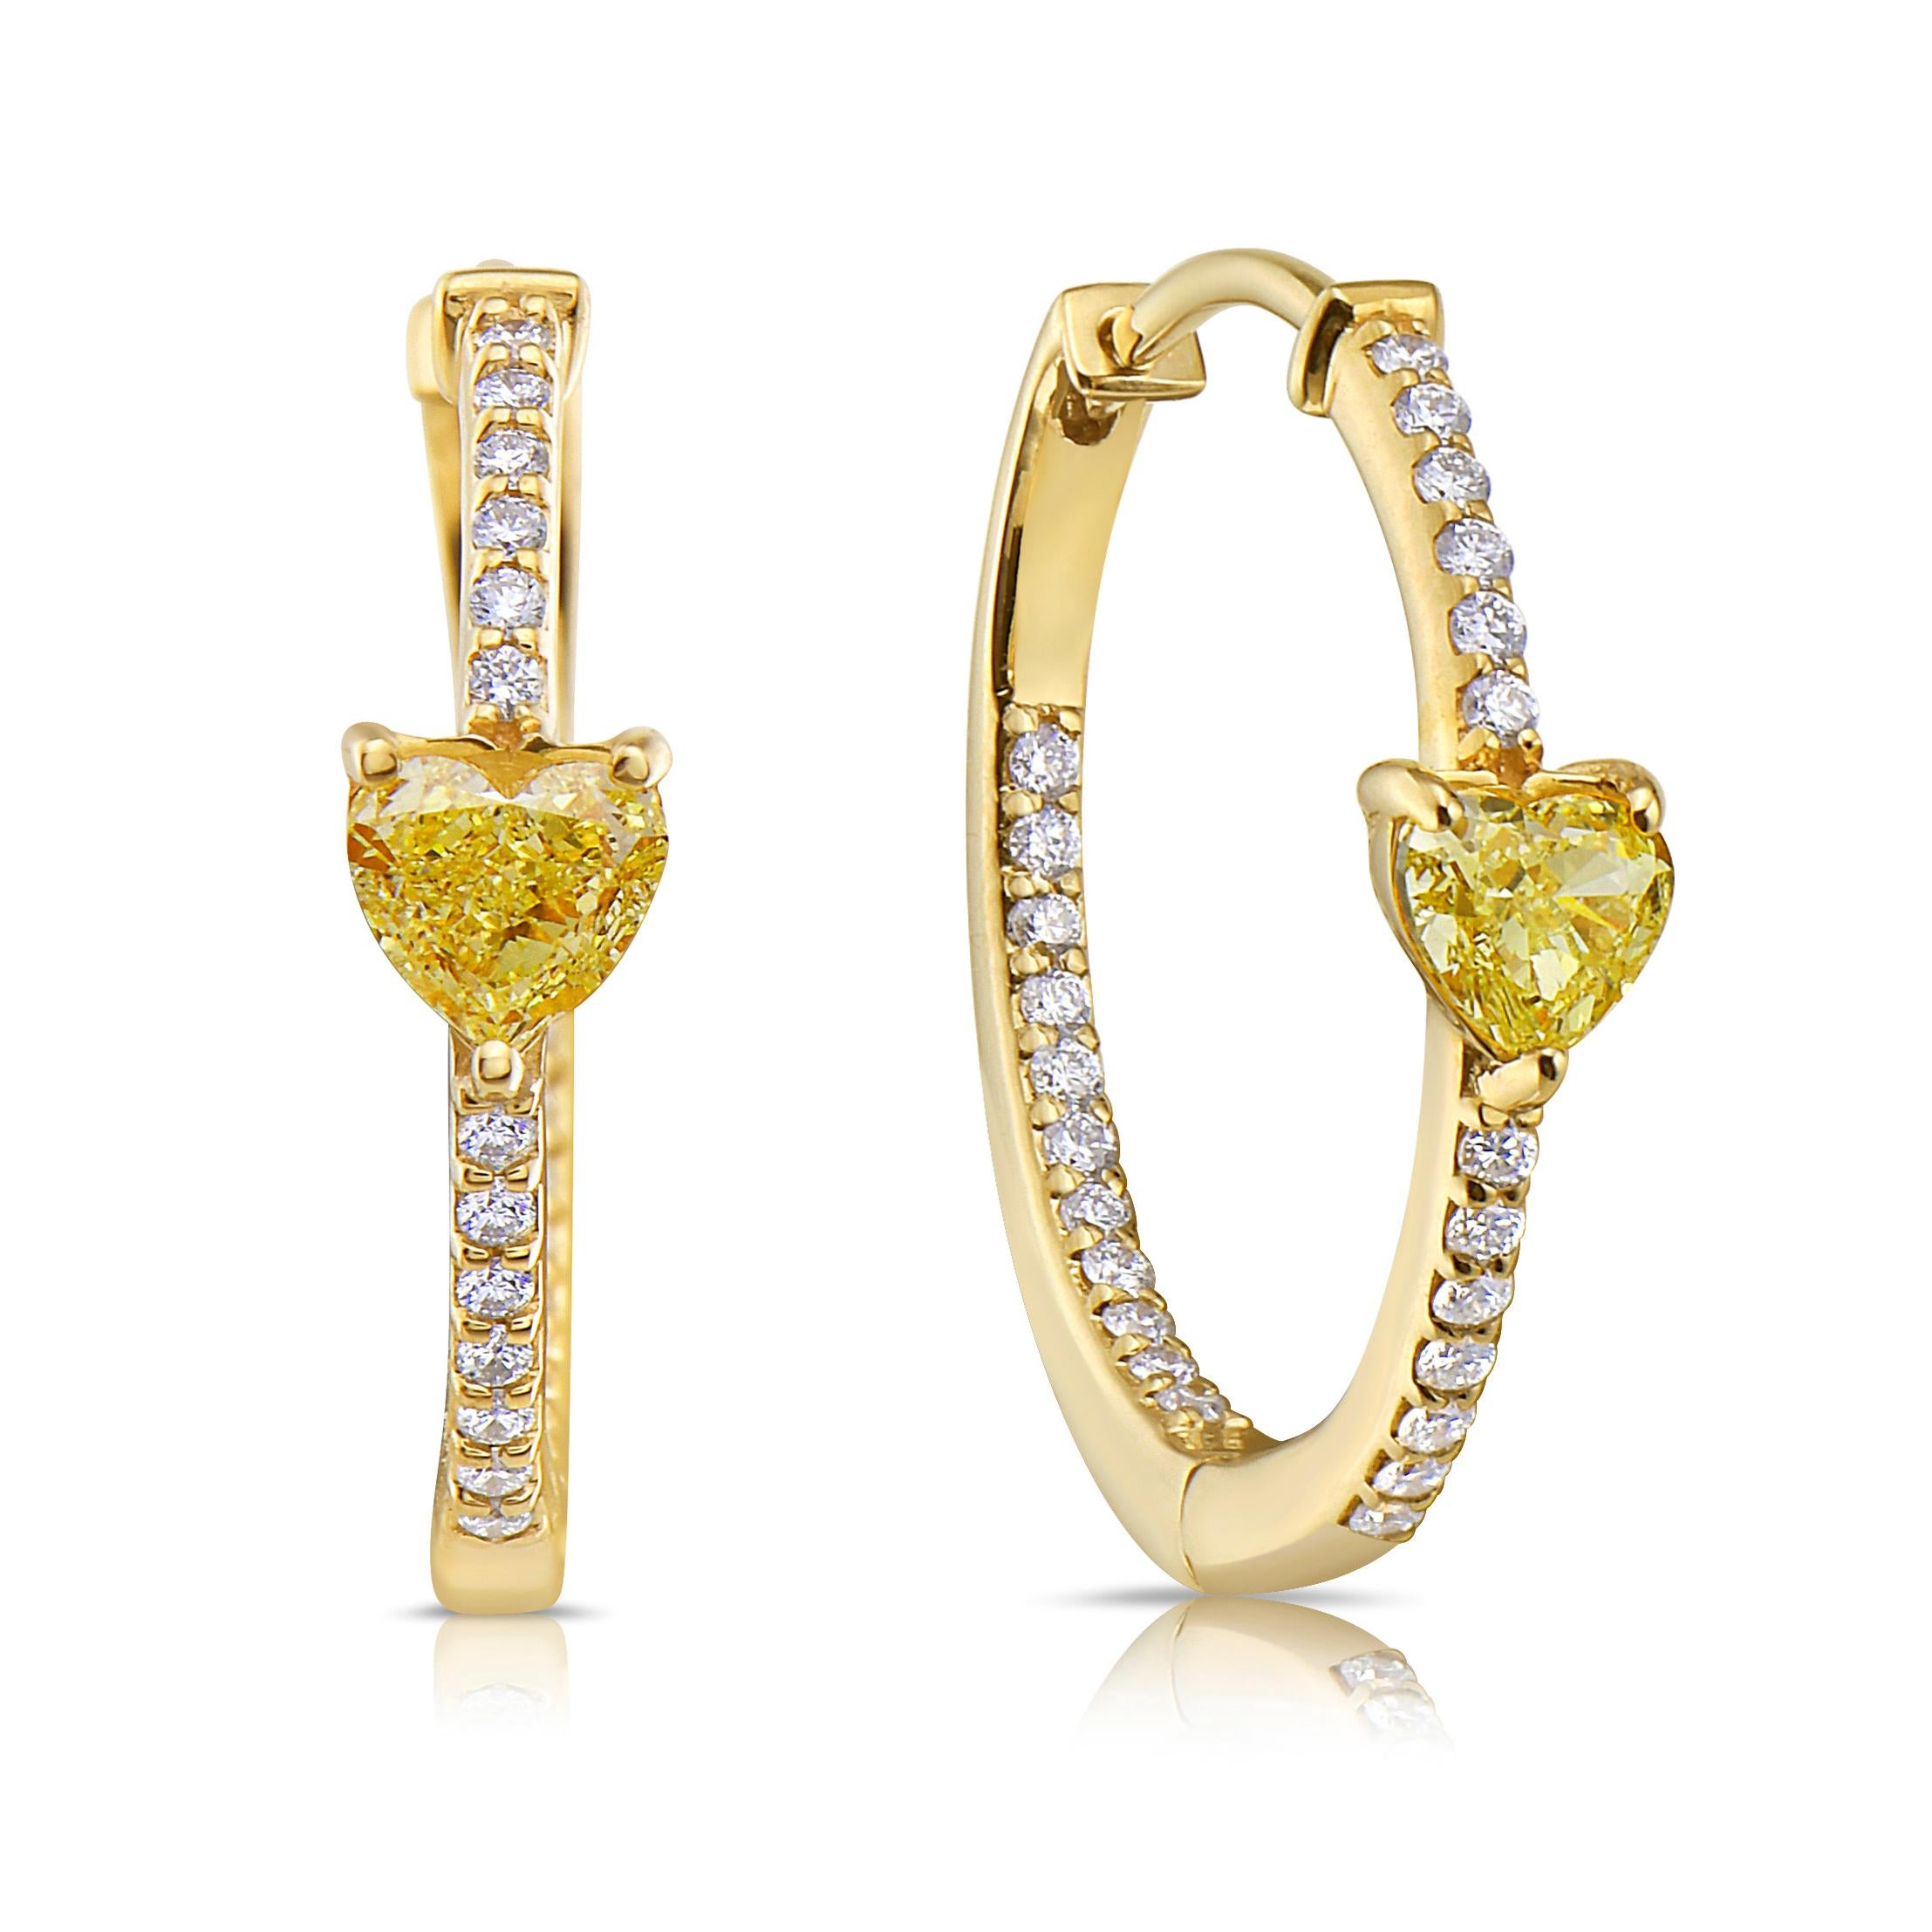 Yellow Diamond Heart Shape Huggie Earrings: The perfect addition to your ear stack or to wear alone!

2 Fancy Yellow Heart Diamonds
Natural white diamonds
VS clarity
0.86 Carat Total Weight
Set 14k Yellow Gold
15mm width
Handmade in NYC

This piece